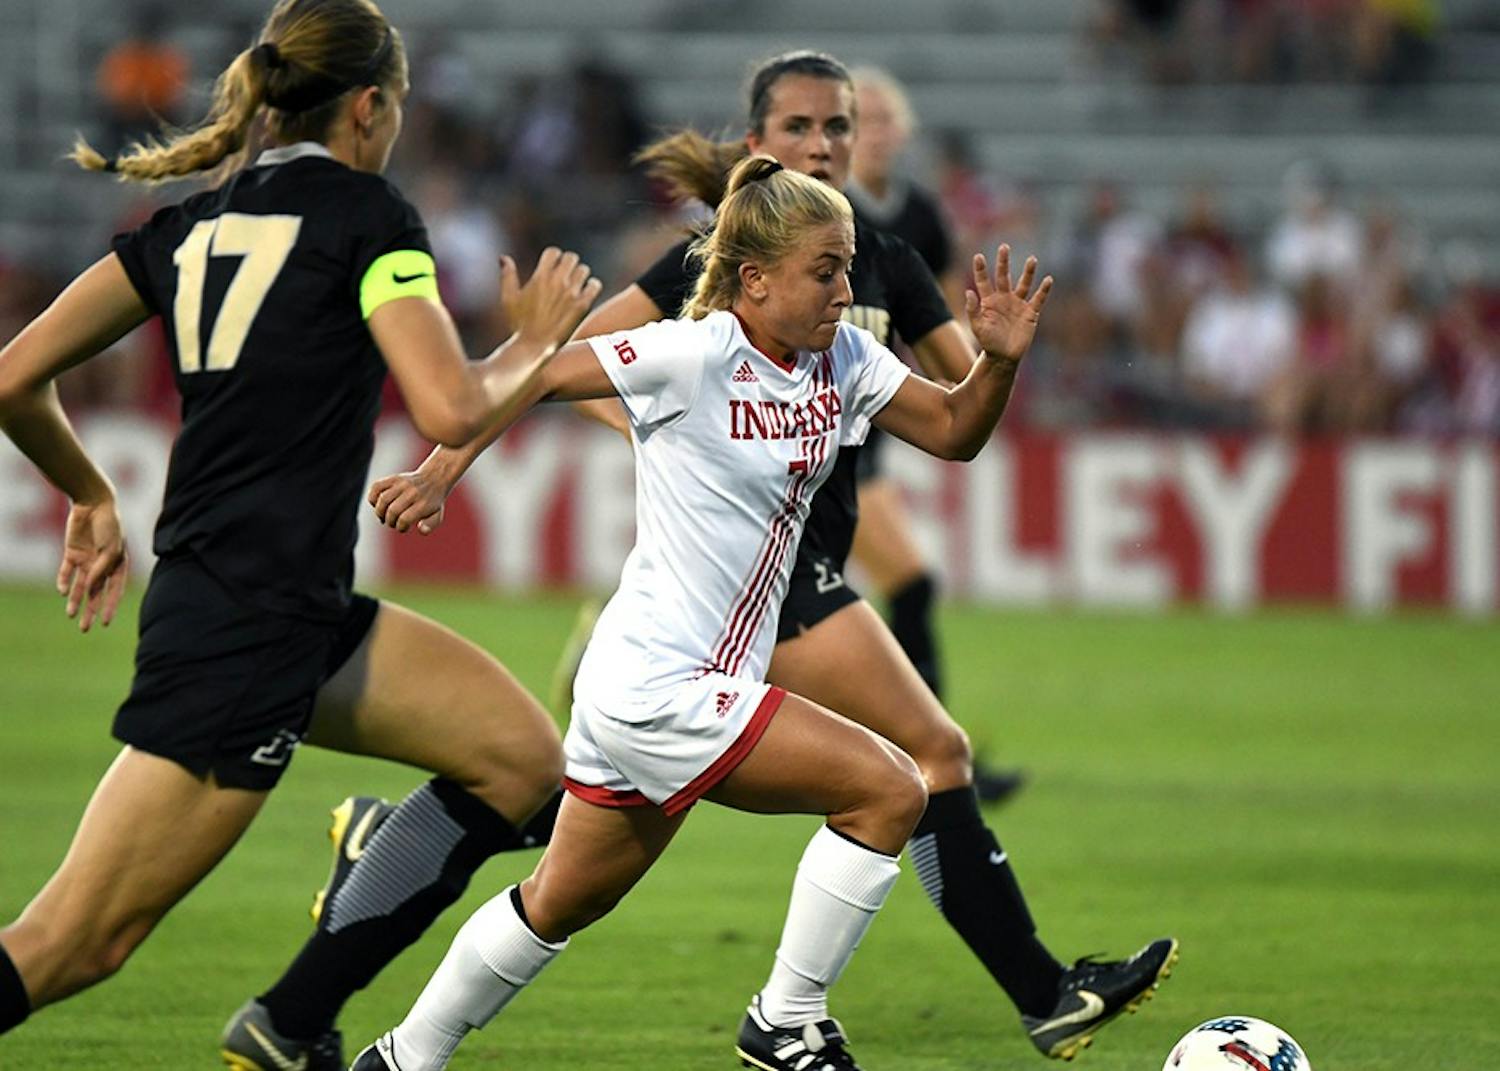 Senior midfielder Kayla Smith drives toward the Purdue goal on Sept. 23 at Bill Armstrong Stadium. Smith played her final game with IU Thursday night as the Hoosiers lost 2-1 at No. 13 Ohio State.